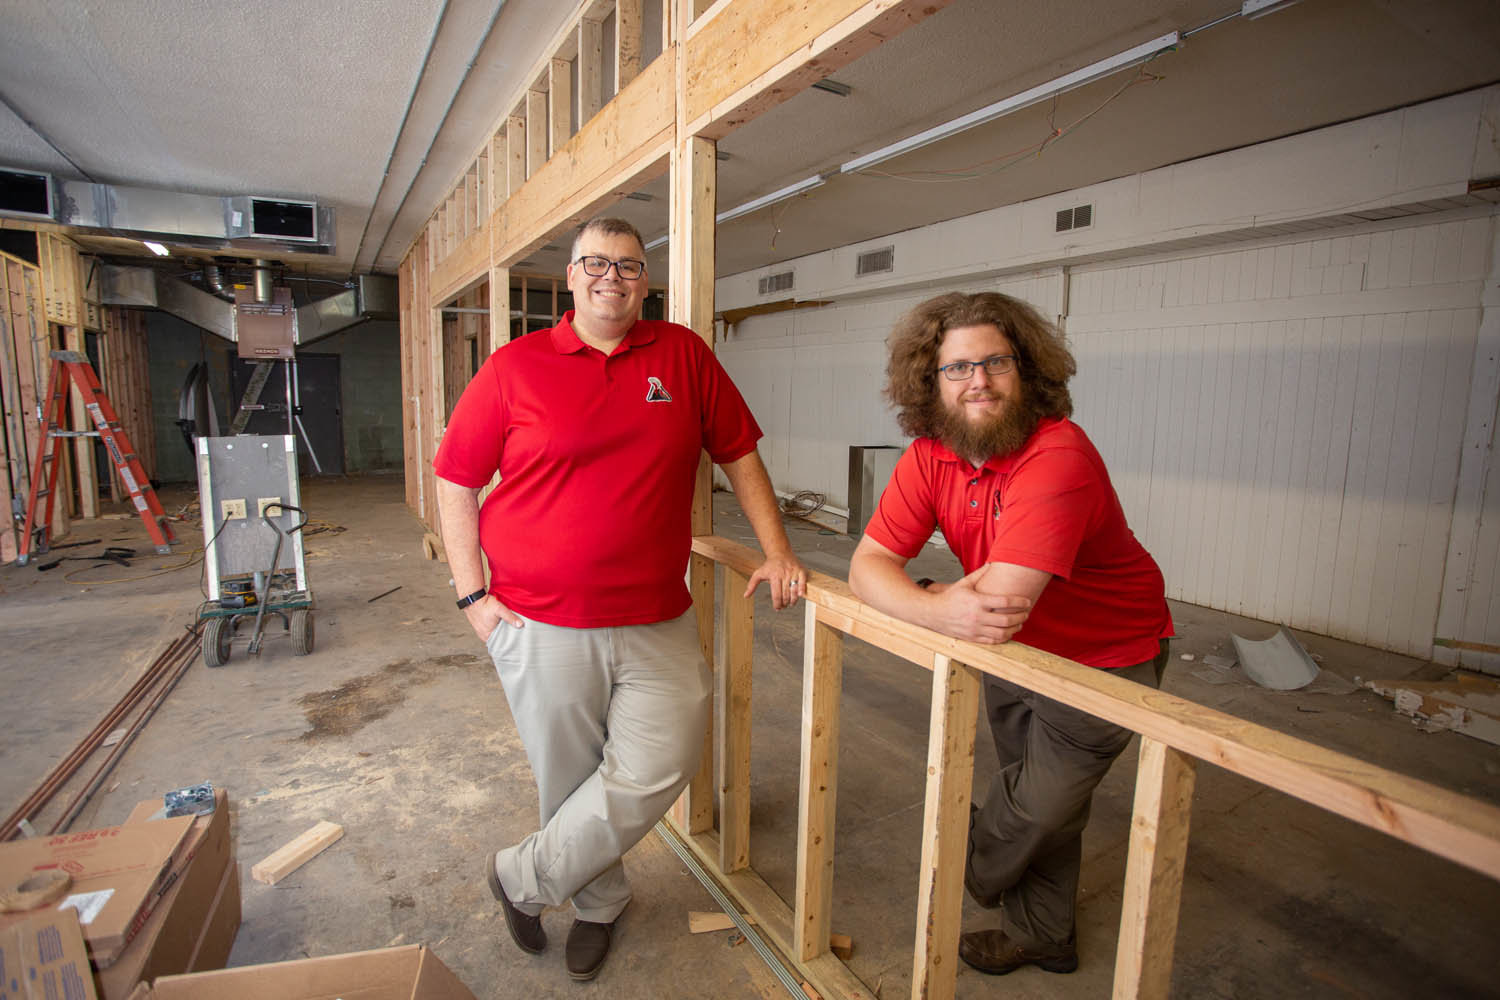 Brewery infill work is ongoing around co-owners Keith Davis, left, and Charley Norton in late 2019.